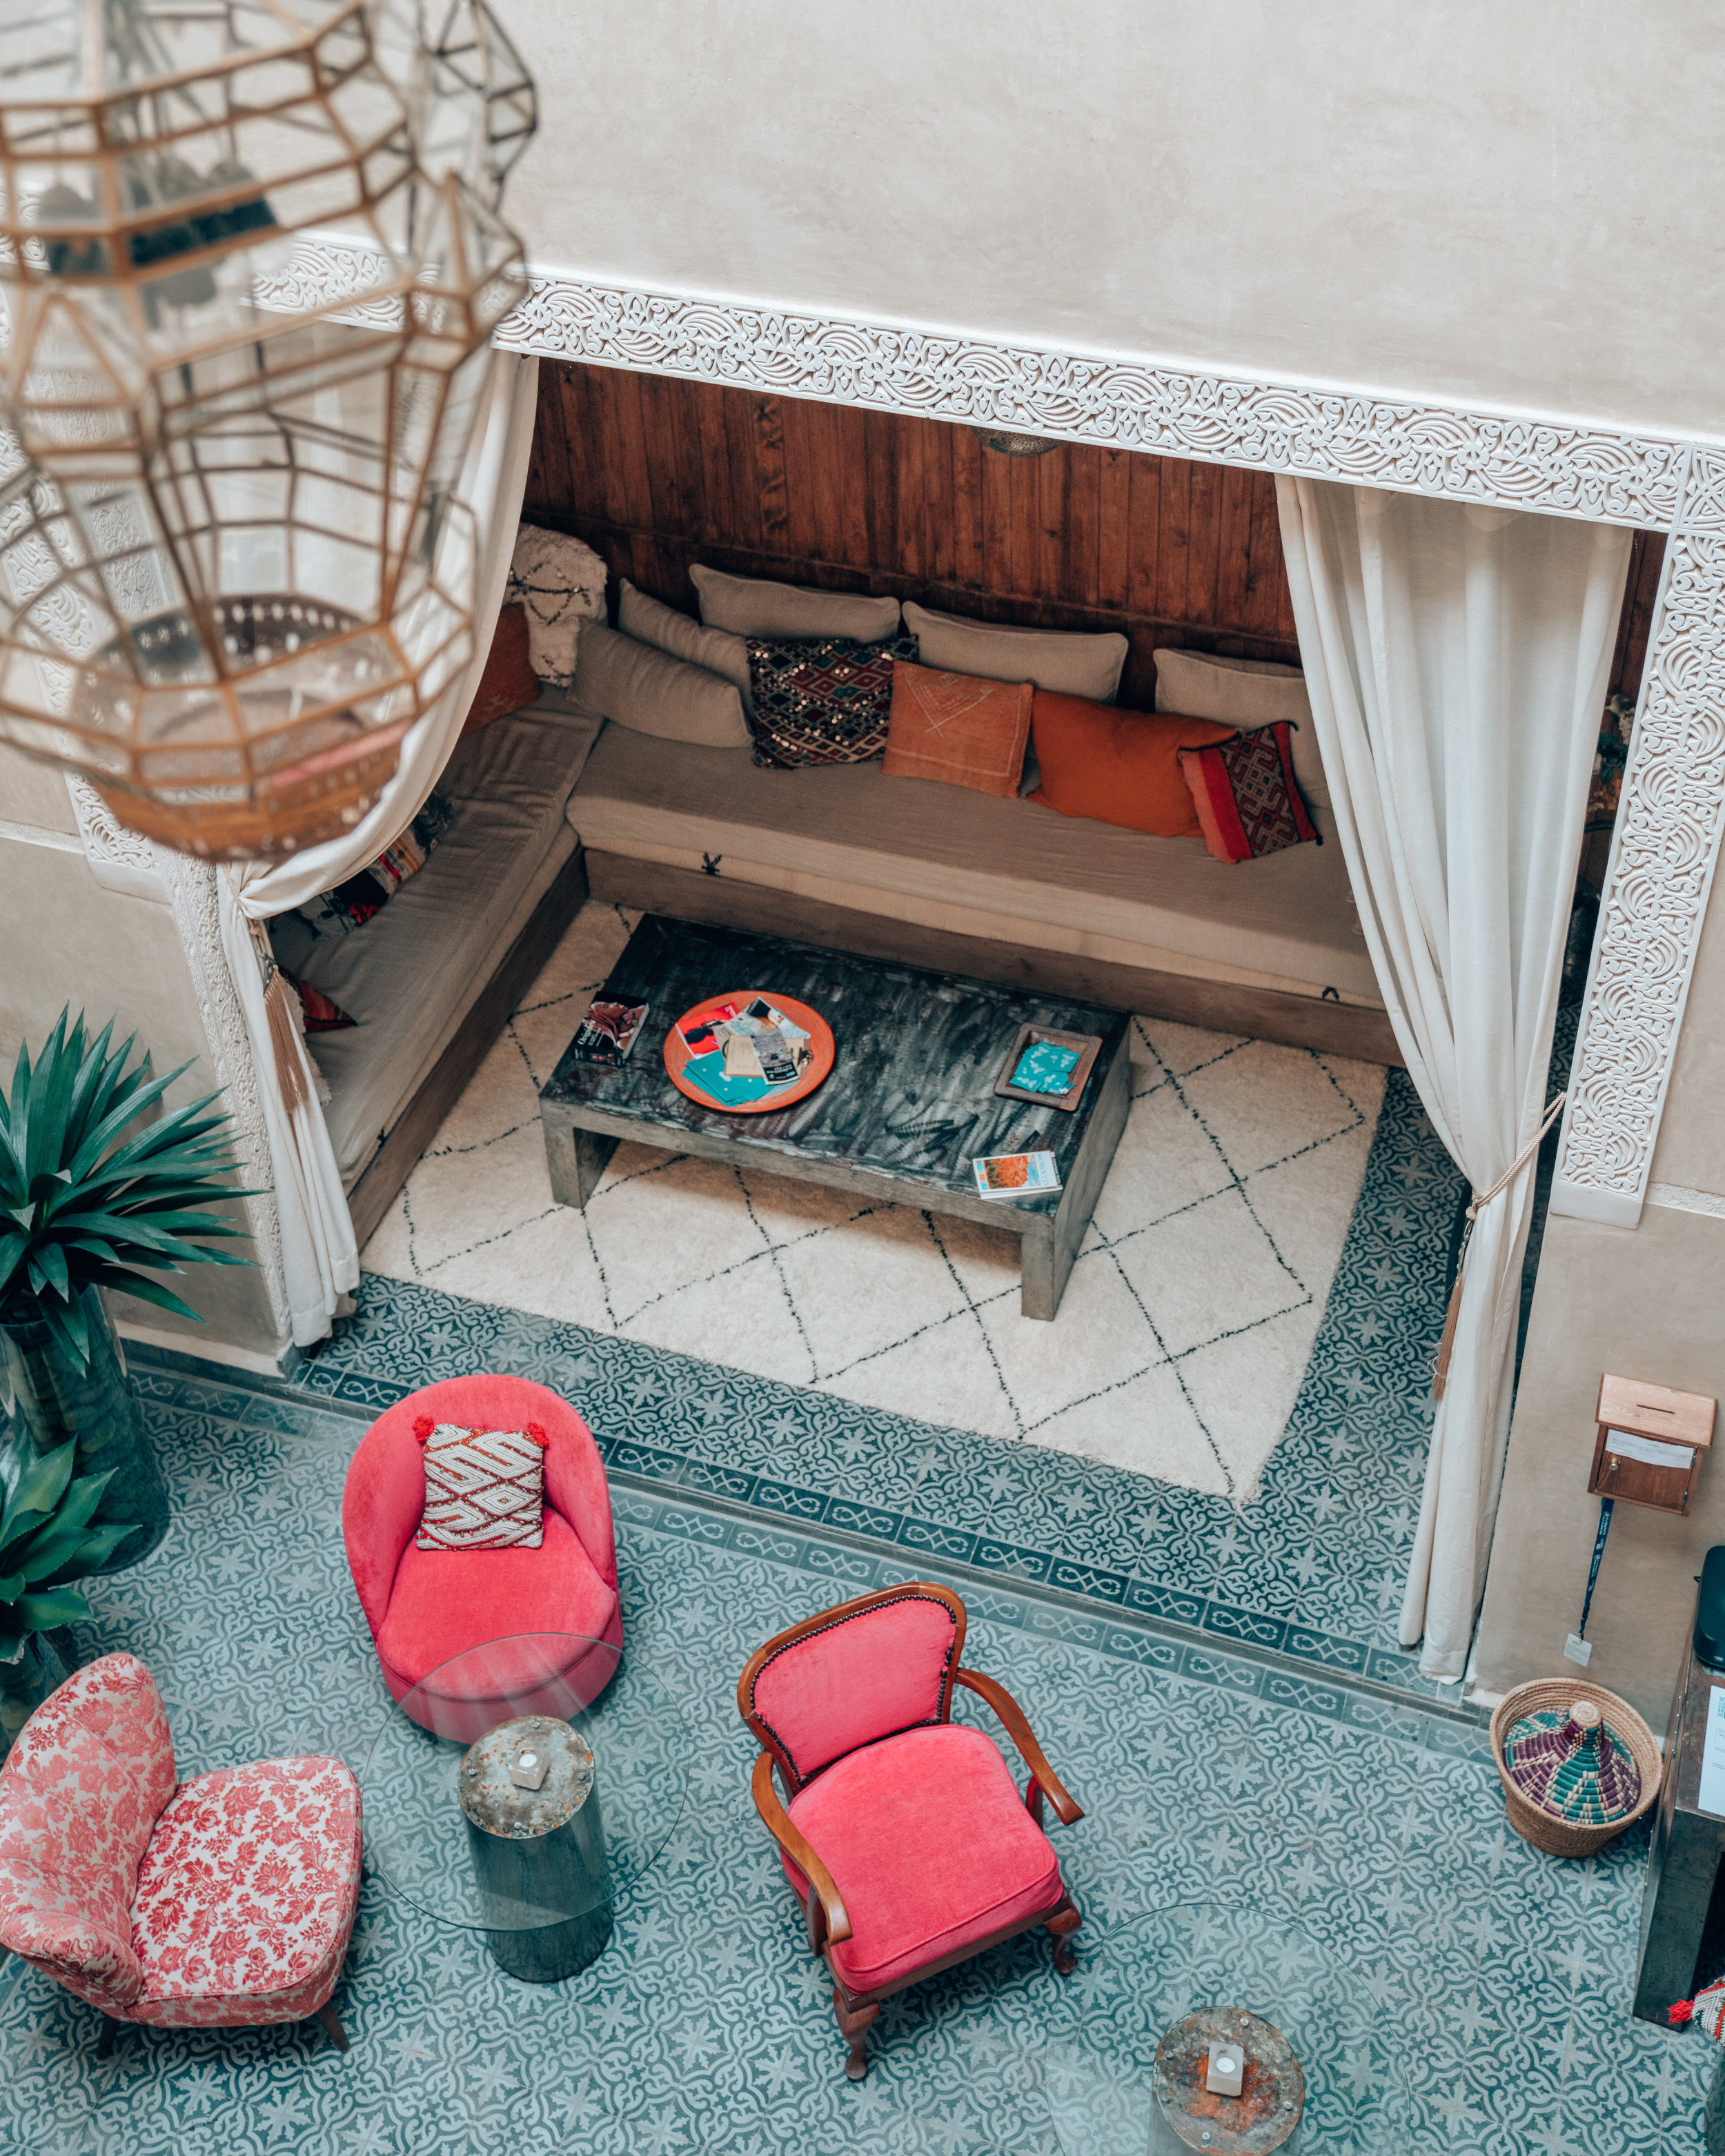 Where to Stay in Fes, Morocco: Riad Anata